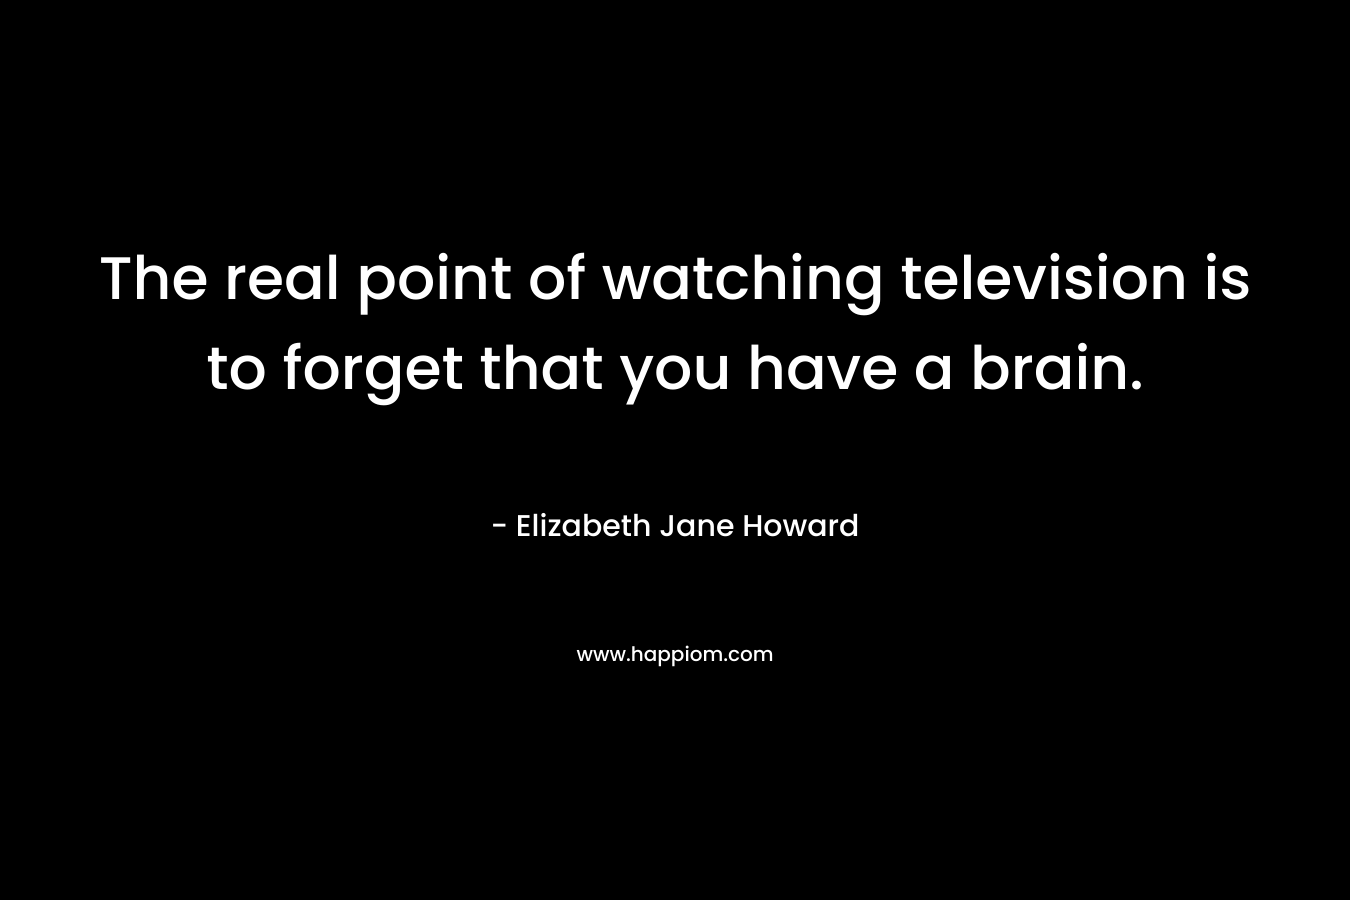 The real point of watching television is to forget that you have a brain.